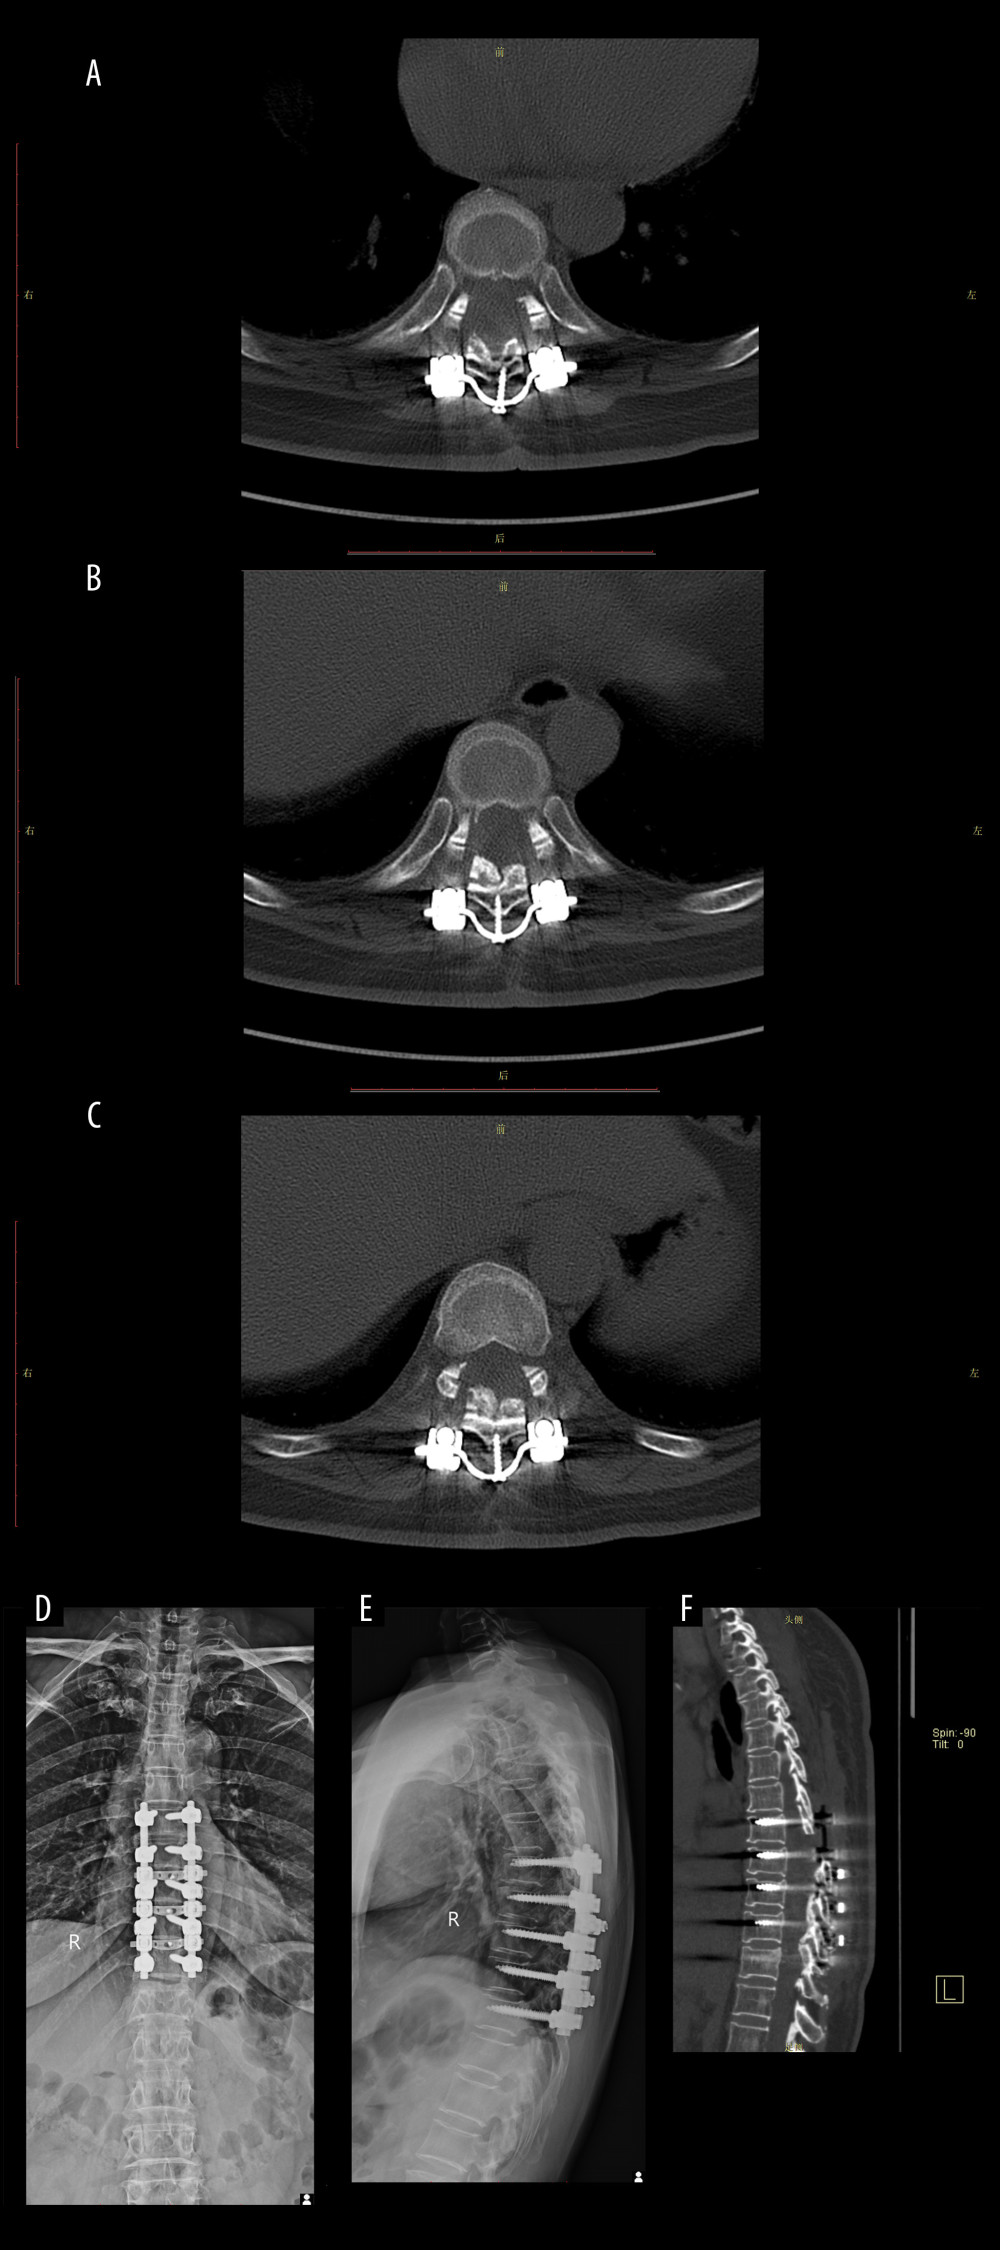 Imaging data of the patient after 6 months of follow-up.(A) Cross-bridge and screws in T8/T9. (B) Cross-bridge and screws in T9/T10. (C) Cross-bridge and screws in T10/T11. (D, E) Plain radiography of the spine showed screws, rods, and cross-bridge were still all in good position during the follow-up. (F) The sagittal sections of a CT scan.